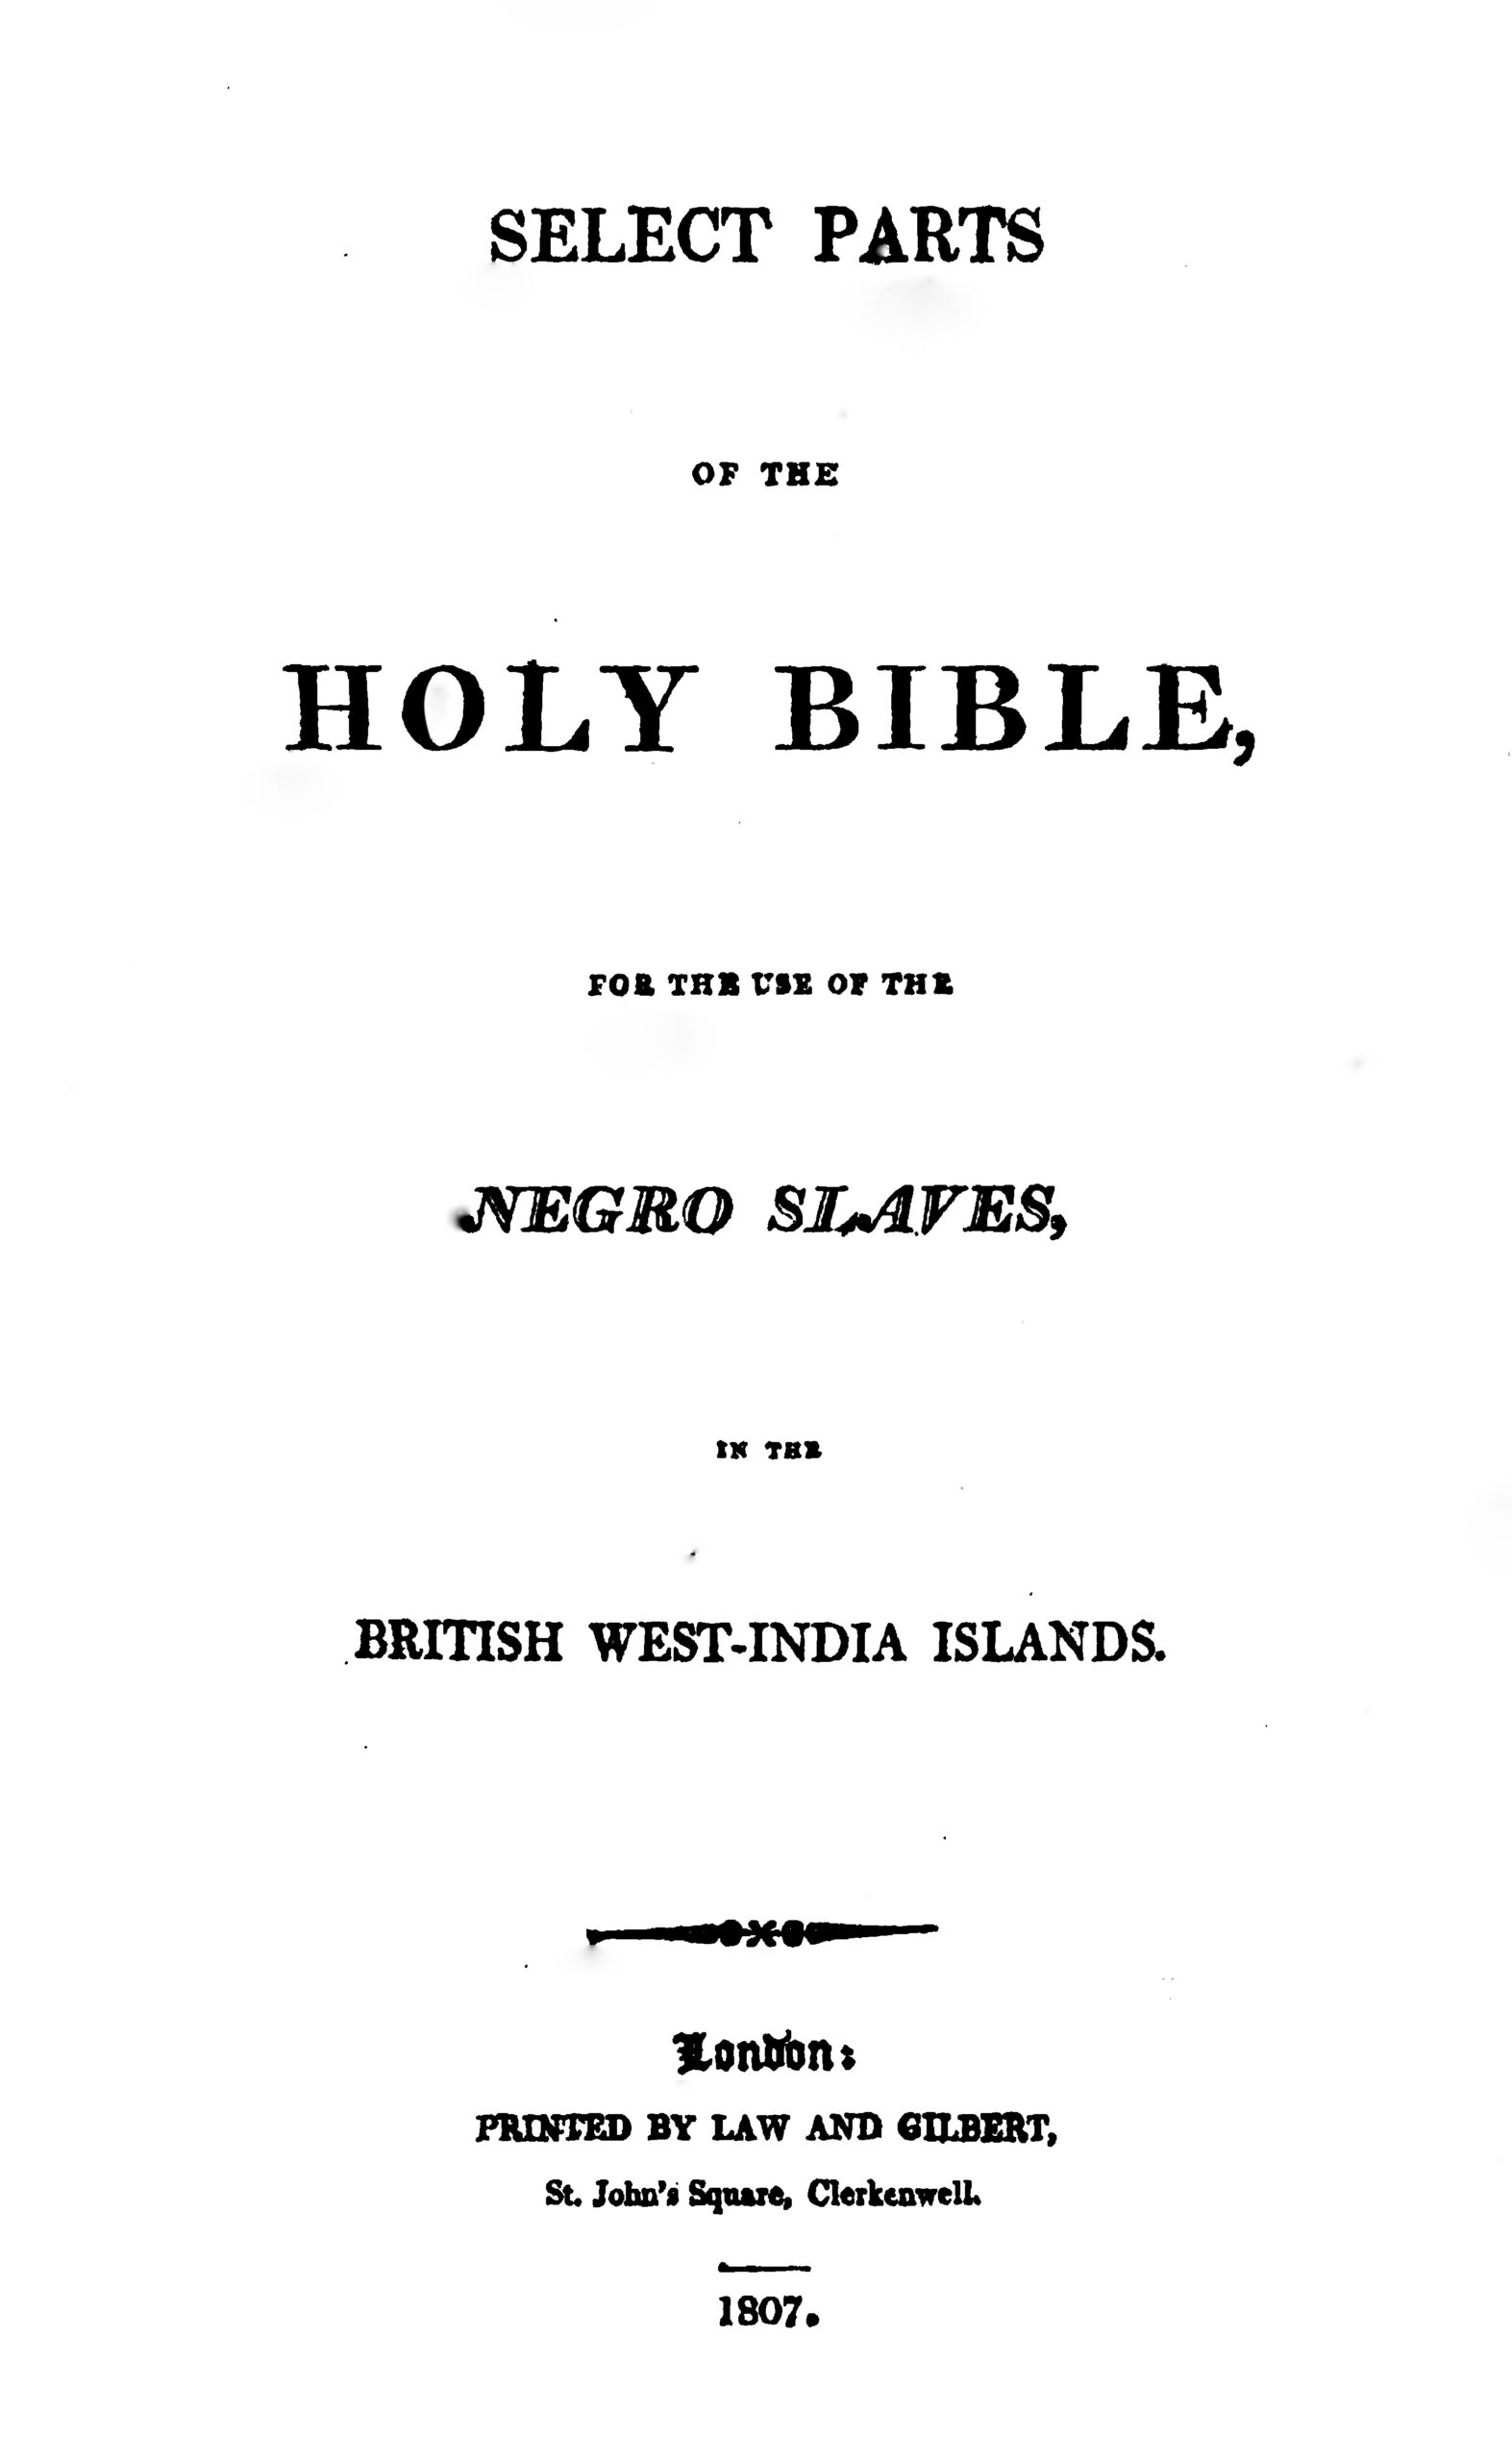 first-page-of-an-european-slaves-bible-select-parts-of-the-holy-bible-for-the-use-of-the-negro